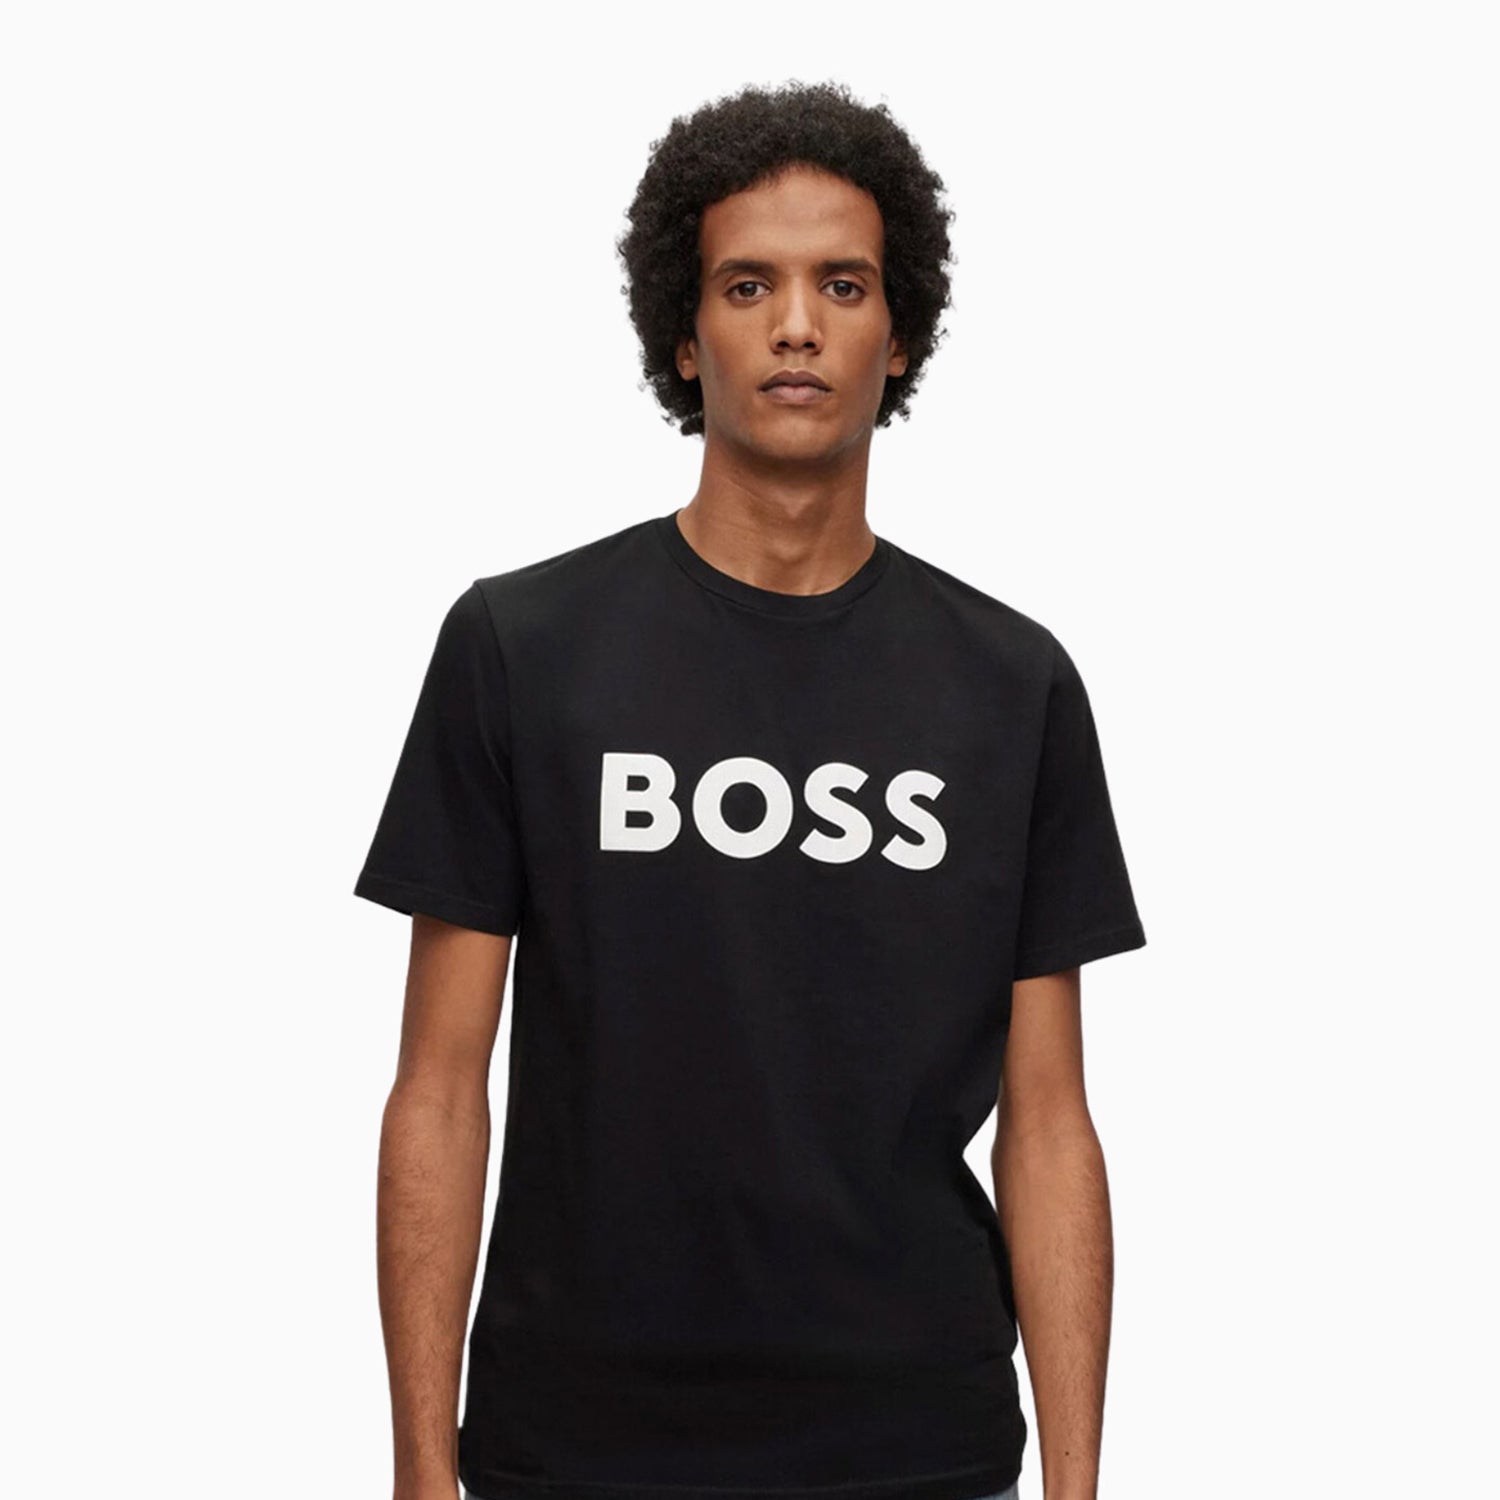 hugo-boss-mens-cotton-with-rubber-print-logo-outfit-50481923-002-50468454-001